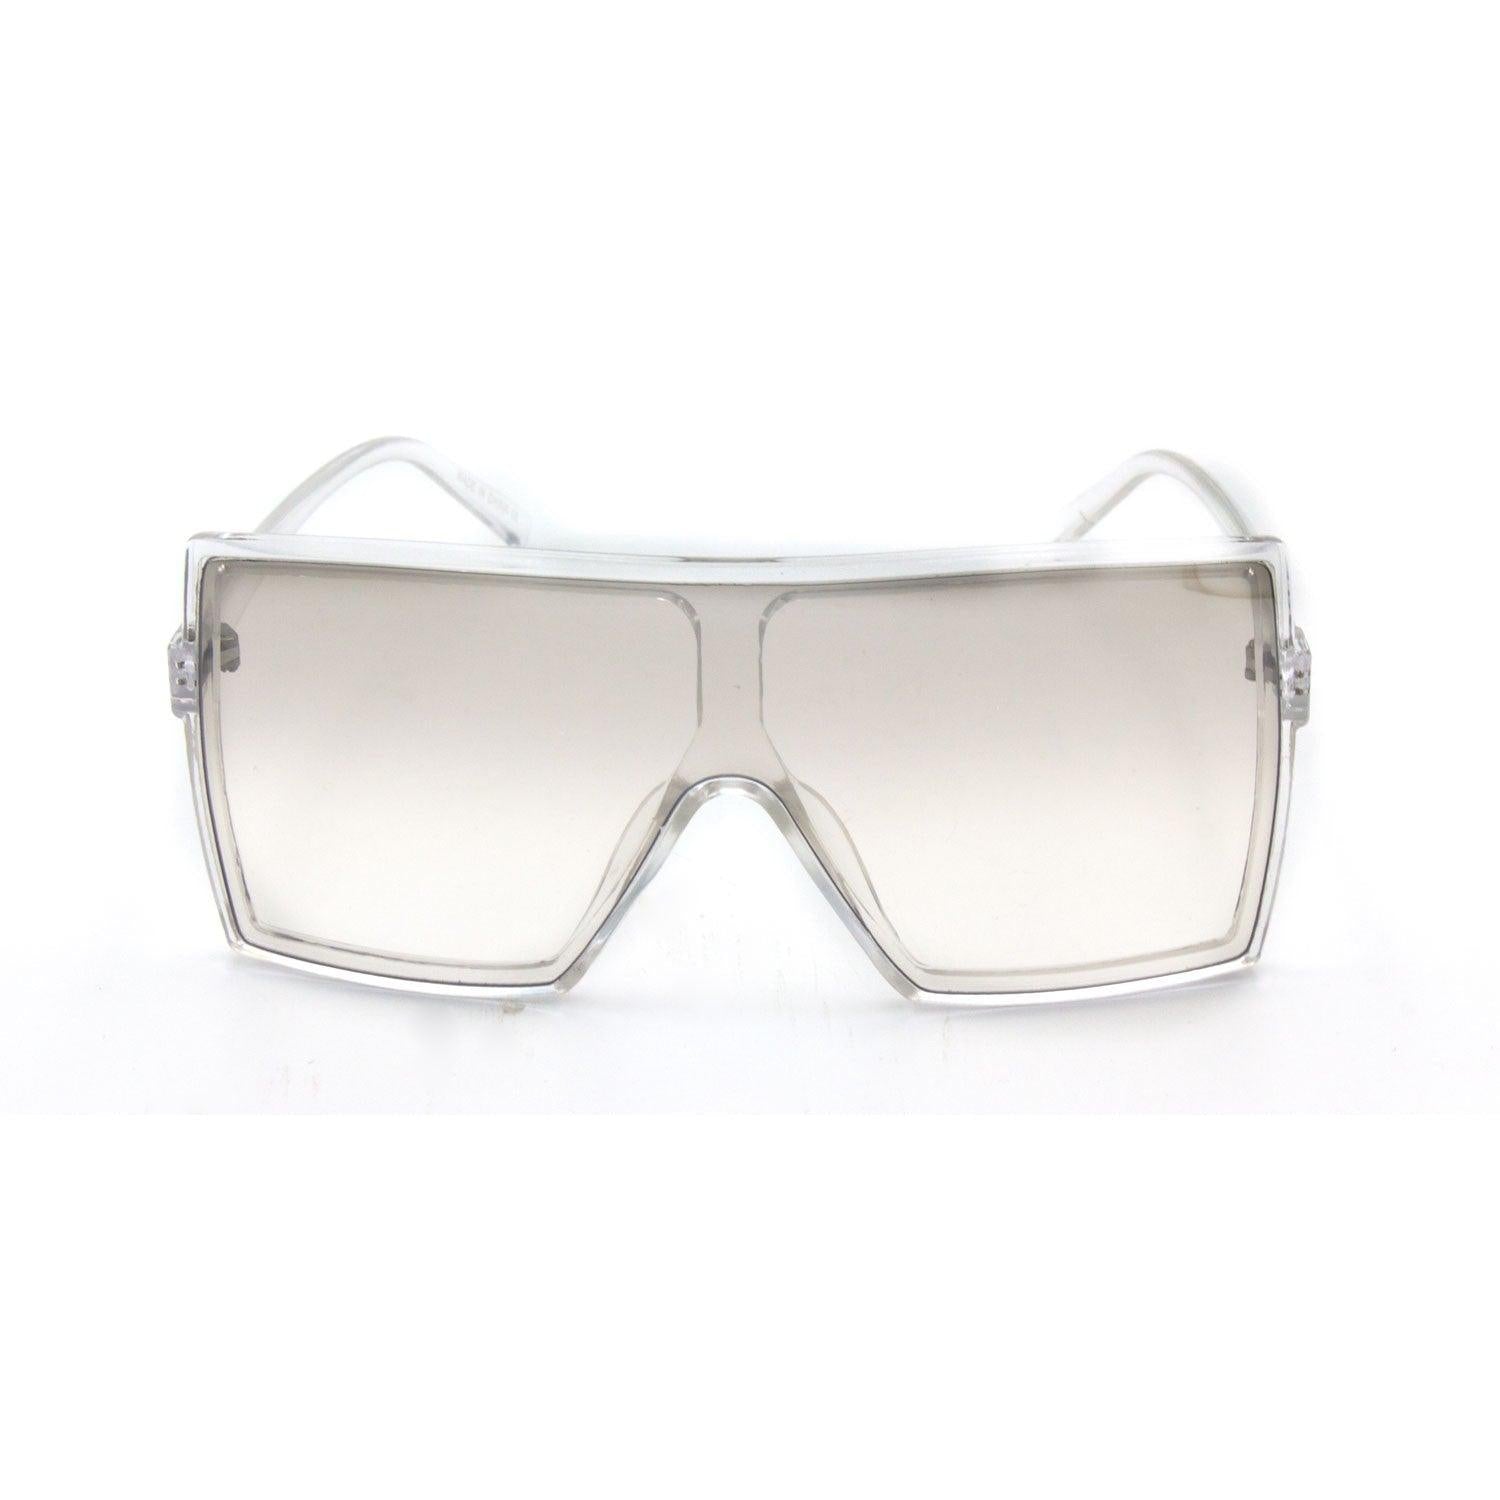 Classic Oversize Square Frames - Weekend Shade Sunglasses